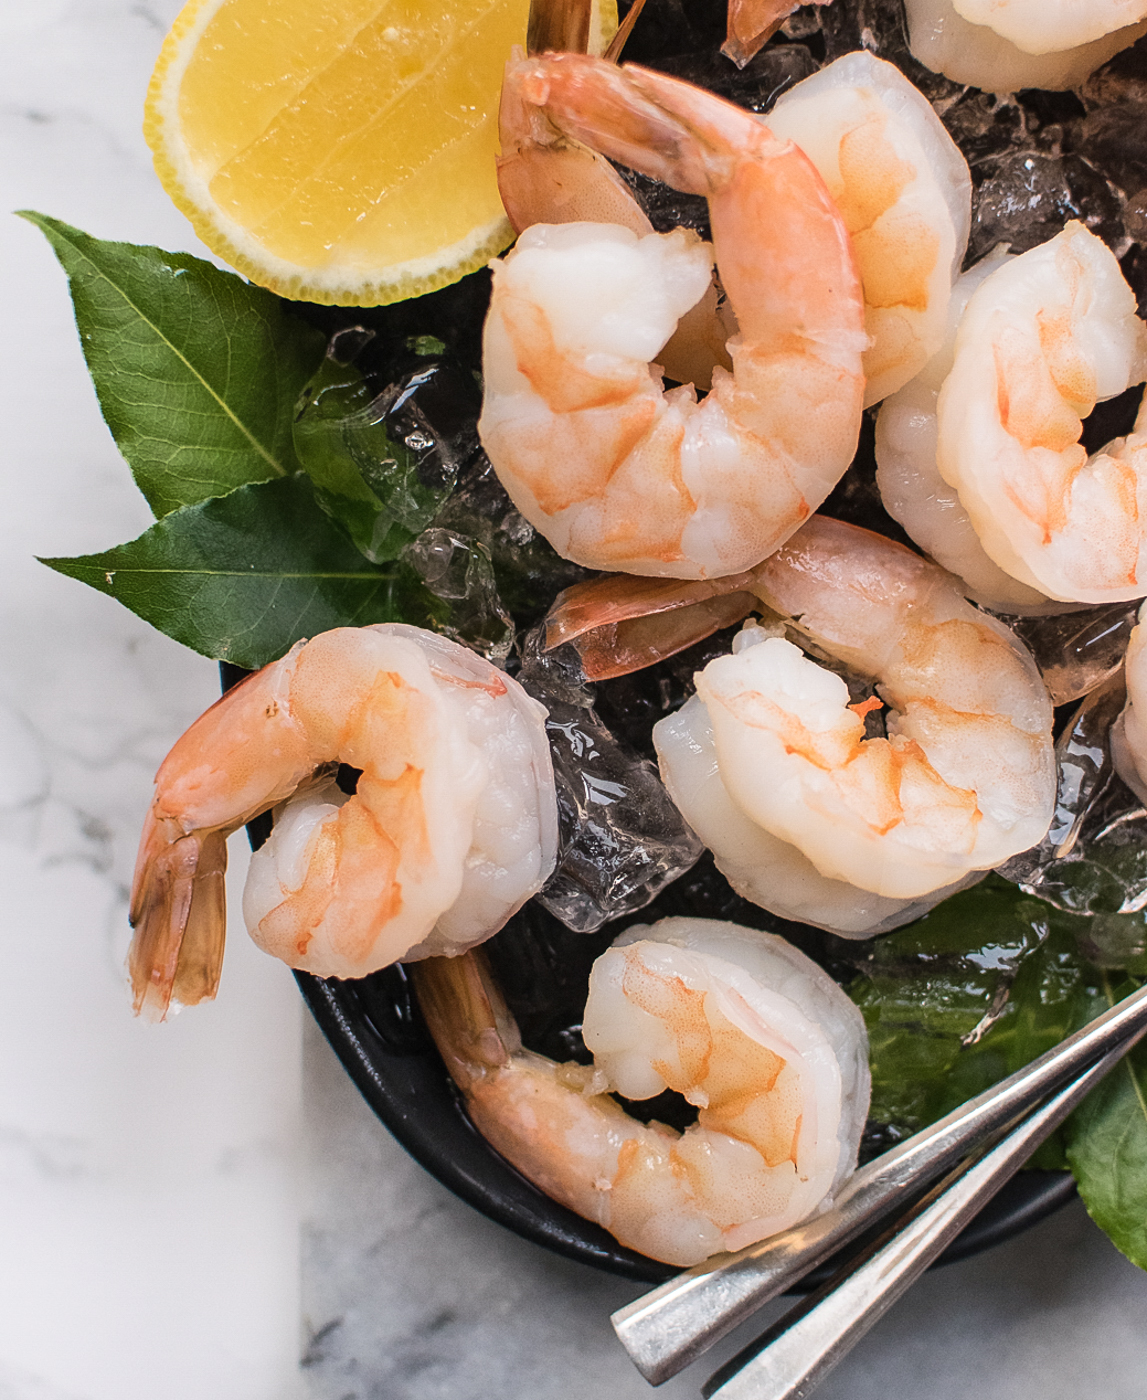 Shrimp Cocktail Recipe (with homemade cocktail sauce) - Two Kooks